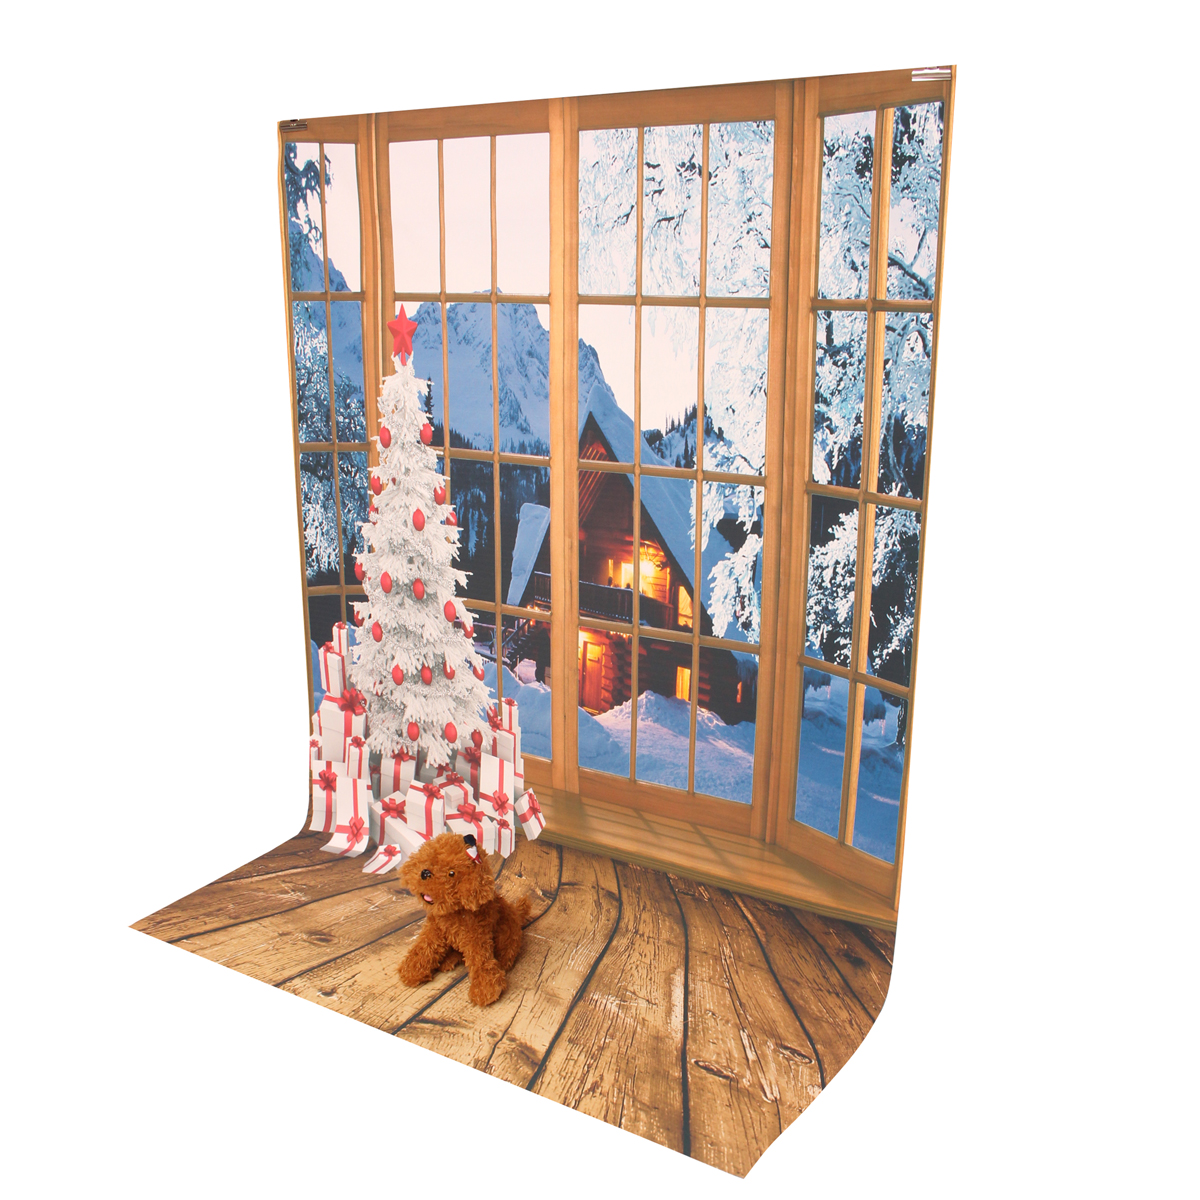 Mohoo-5x7ft-15x21m-Christmas-Backdrop-Photo-Window-Backdrop-with-Wooden-Floor-Christmas-Tree-Snow-Co-1958159-8